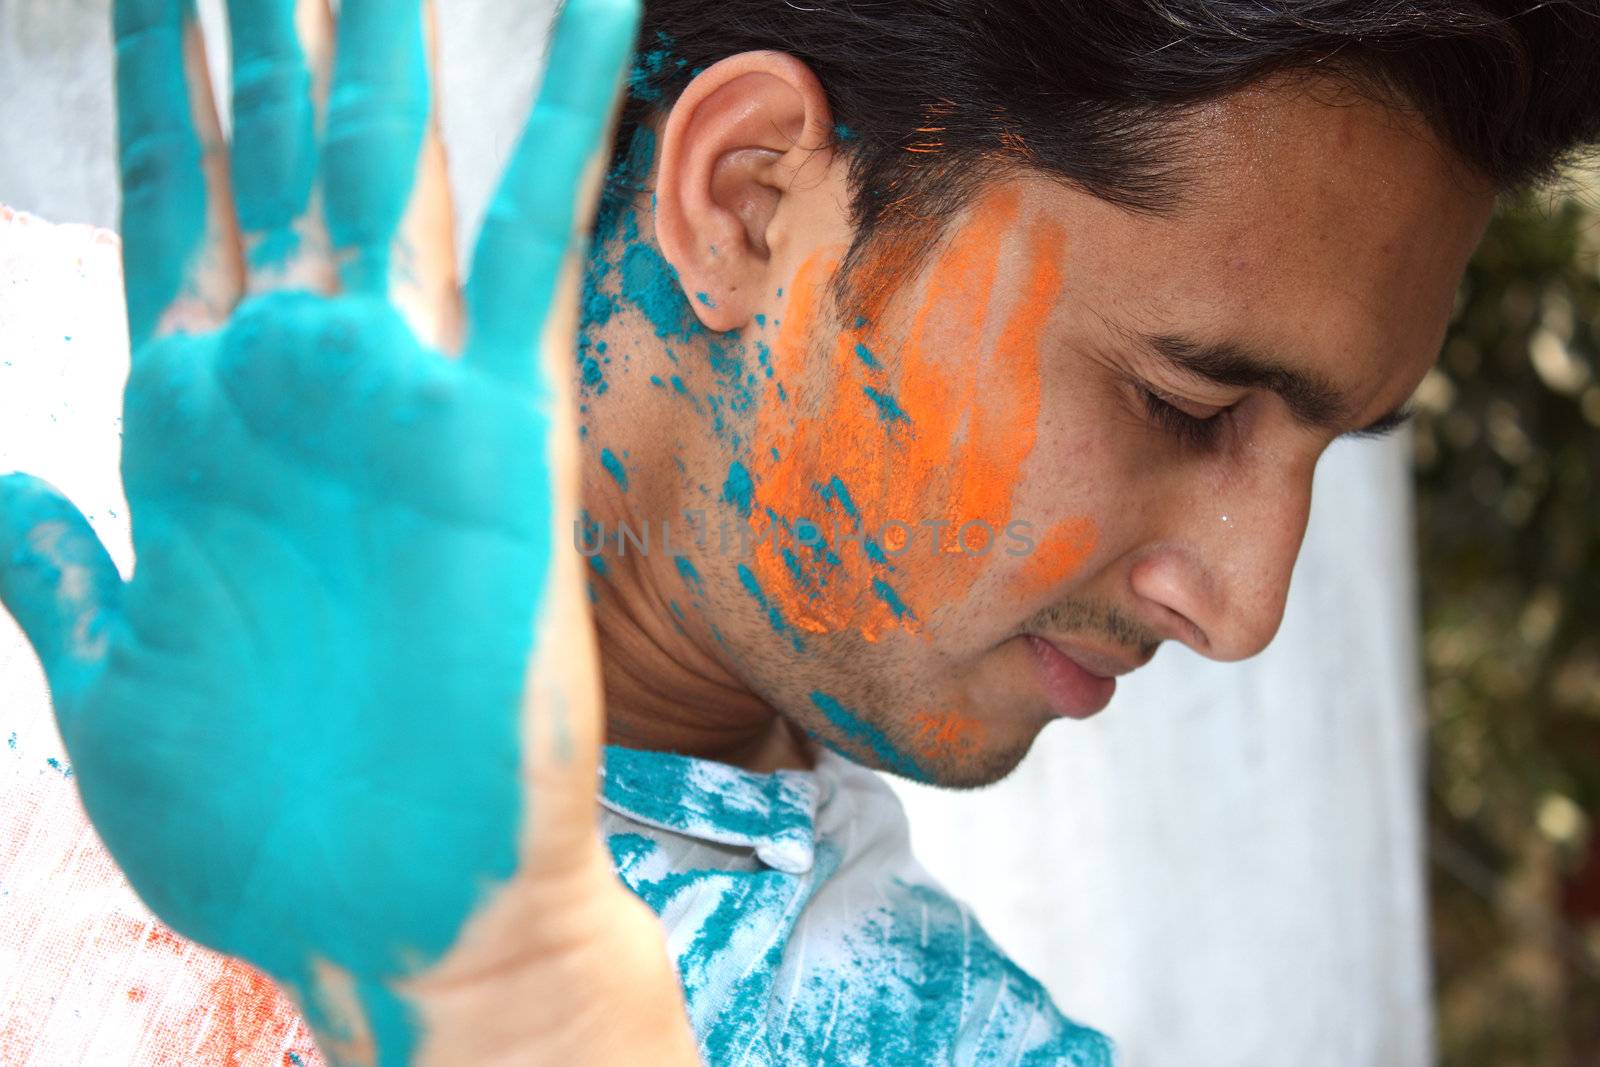 A young Indian man uses his hand to stop holi colors getting on to his face.